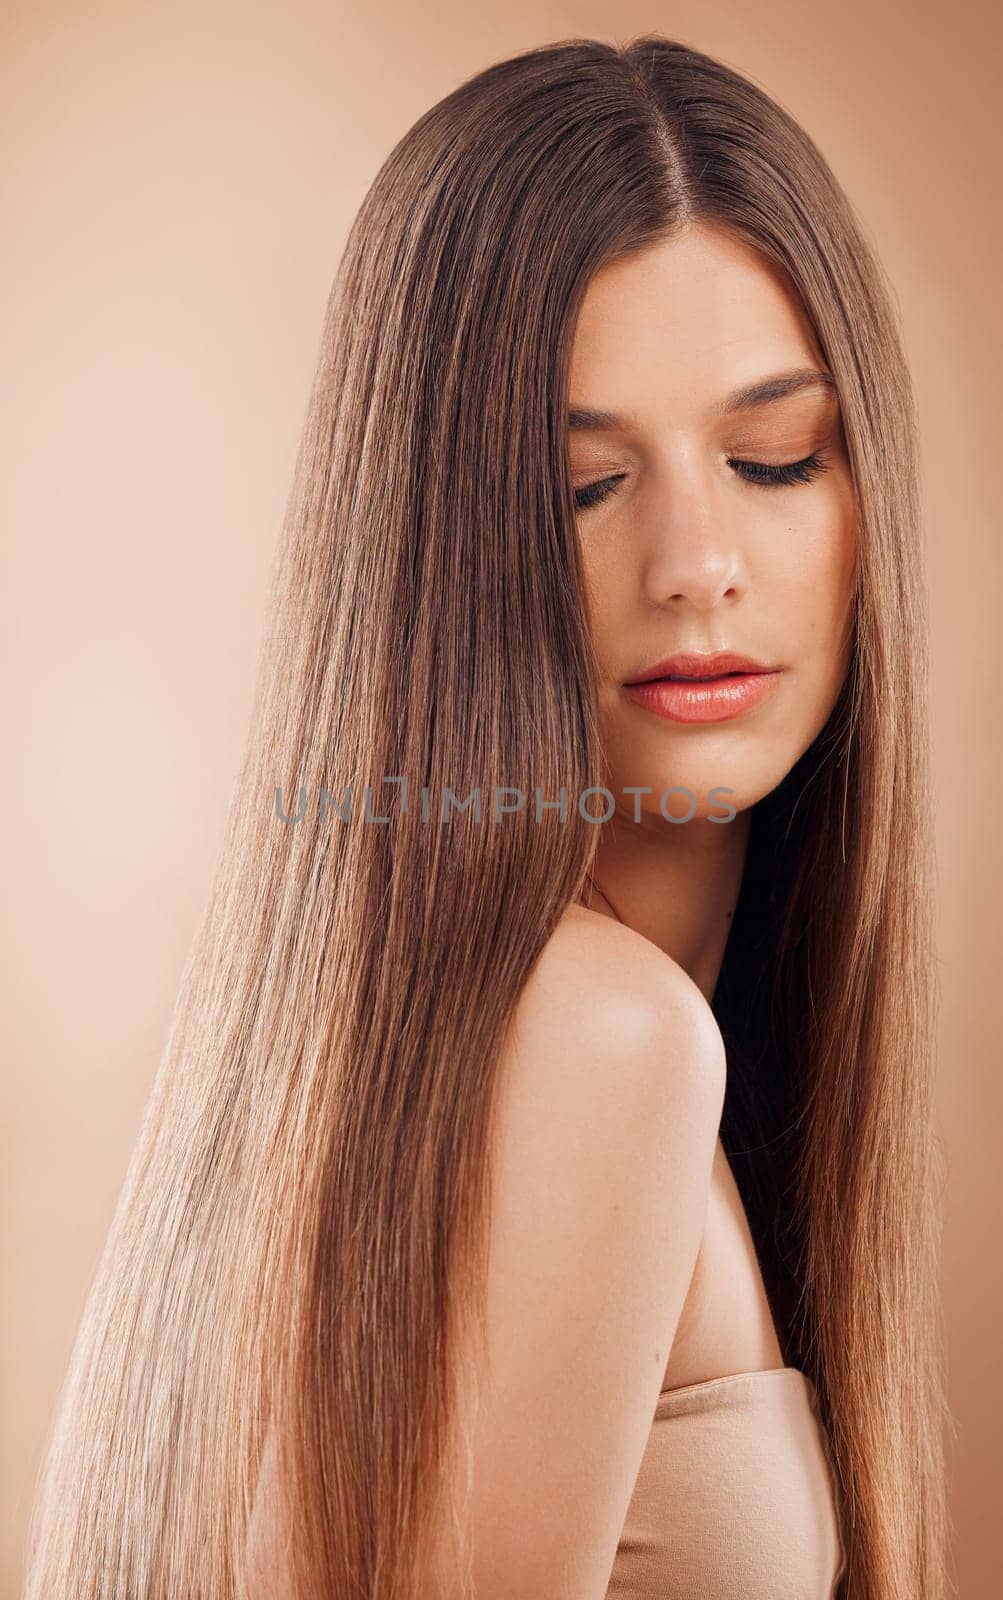 Hair care, beauty and woman on studio background for cosmetics, makeup and shampoo for shine, growth and strong texture hairstyle. Face of brunette posing for hairdresser or luxury salon product by YuriArcurs